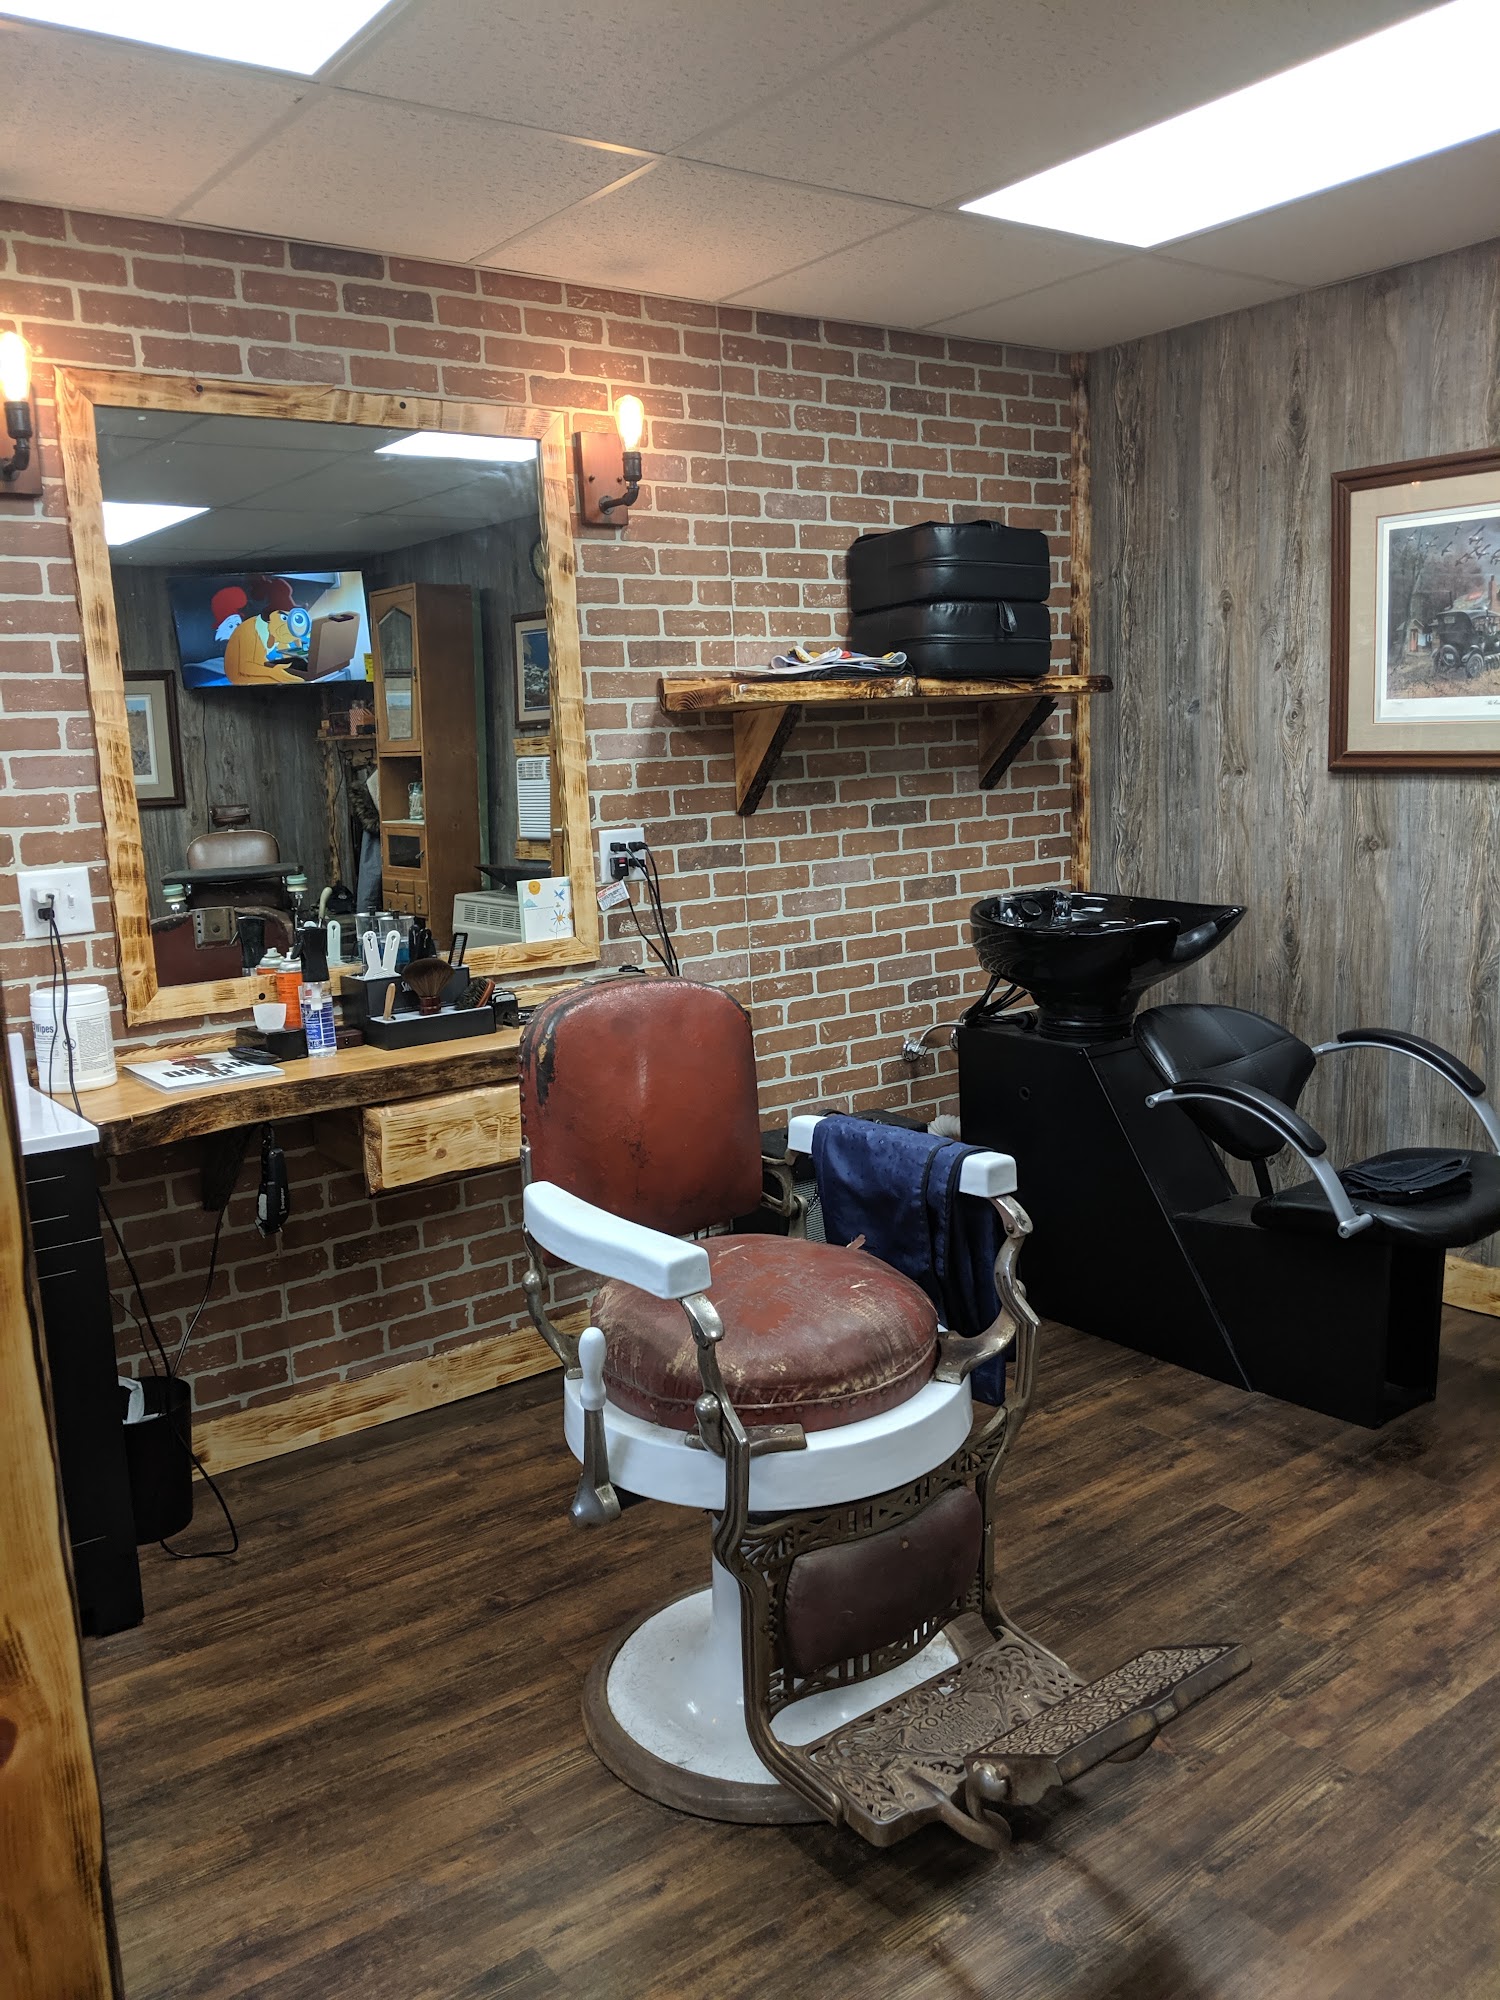 Audreys Barber Shop 407 4th Ave W, Durand Wisconsin 54736